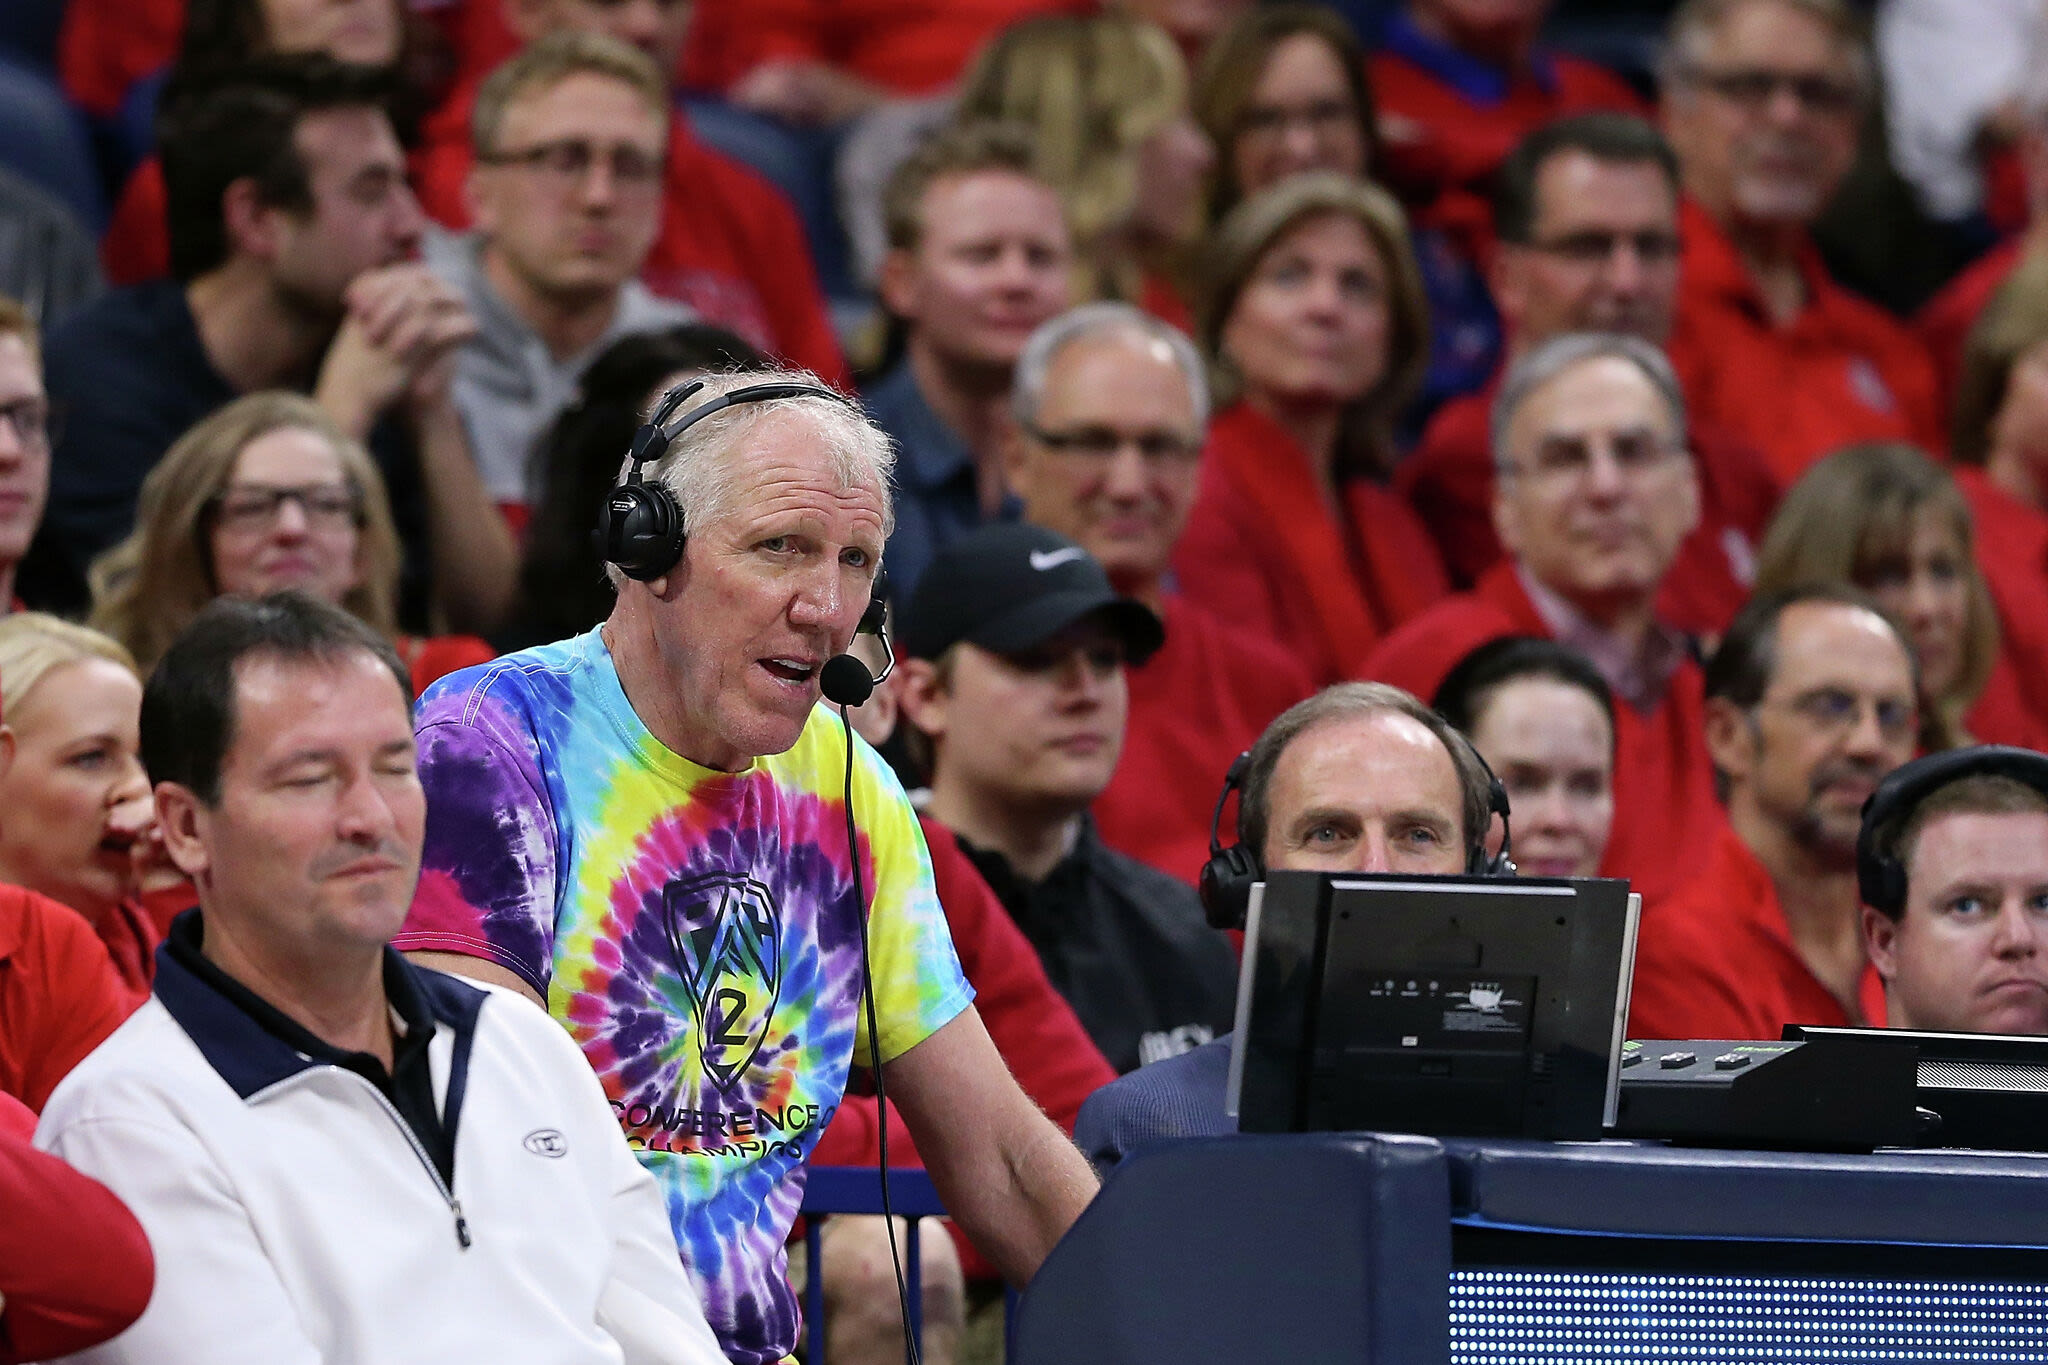 Grateful Dead mourns the loss of Bill Walton in moving tributes